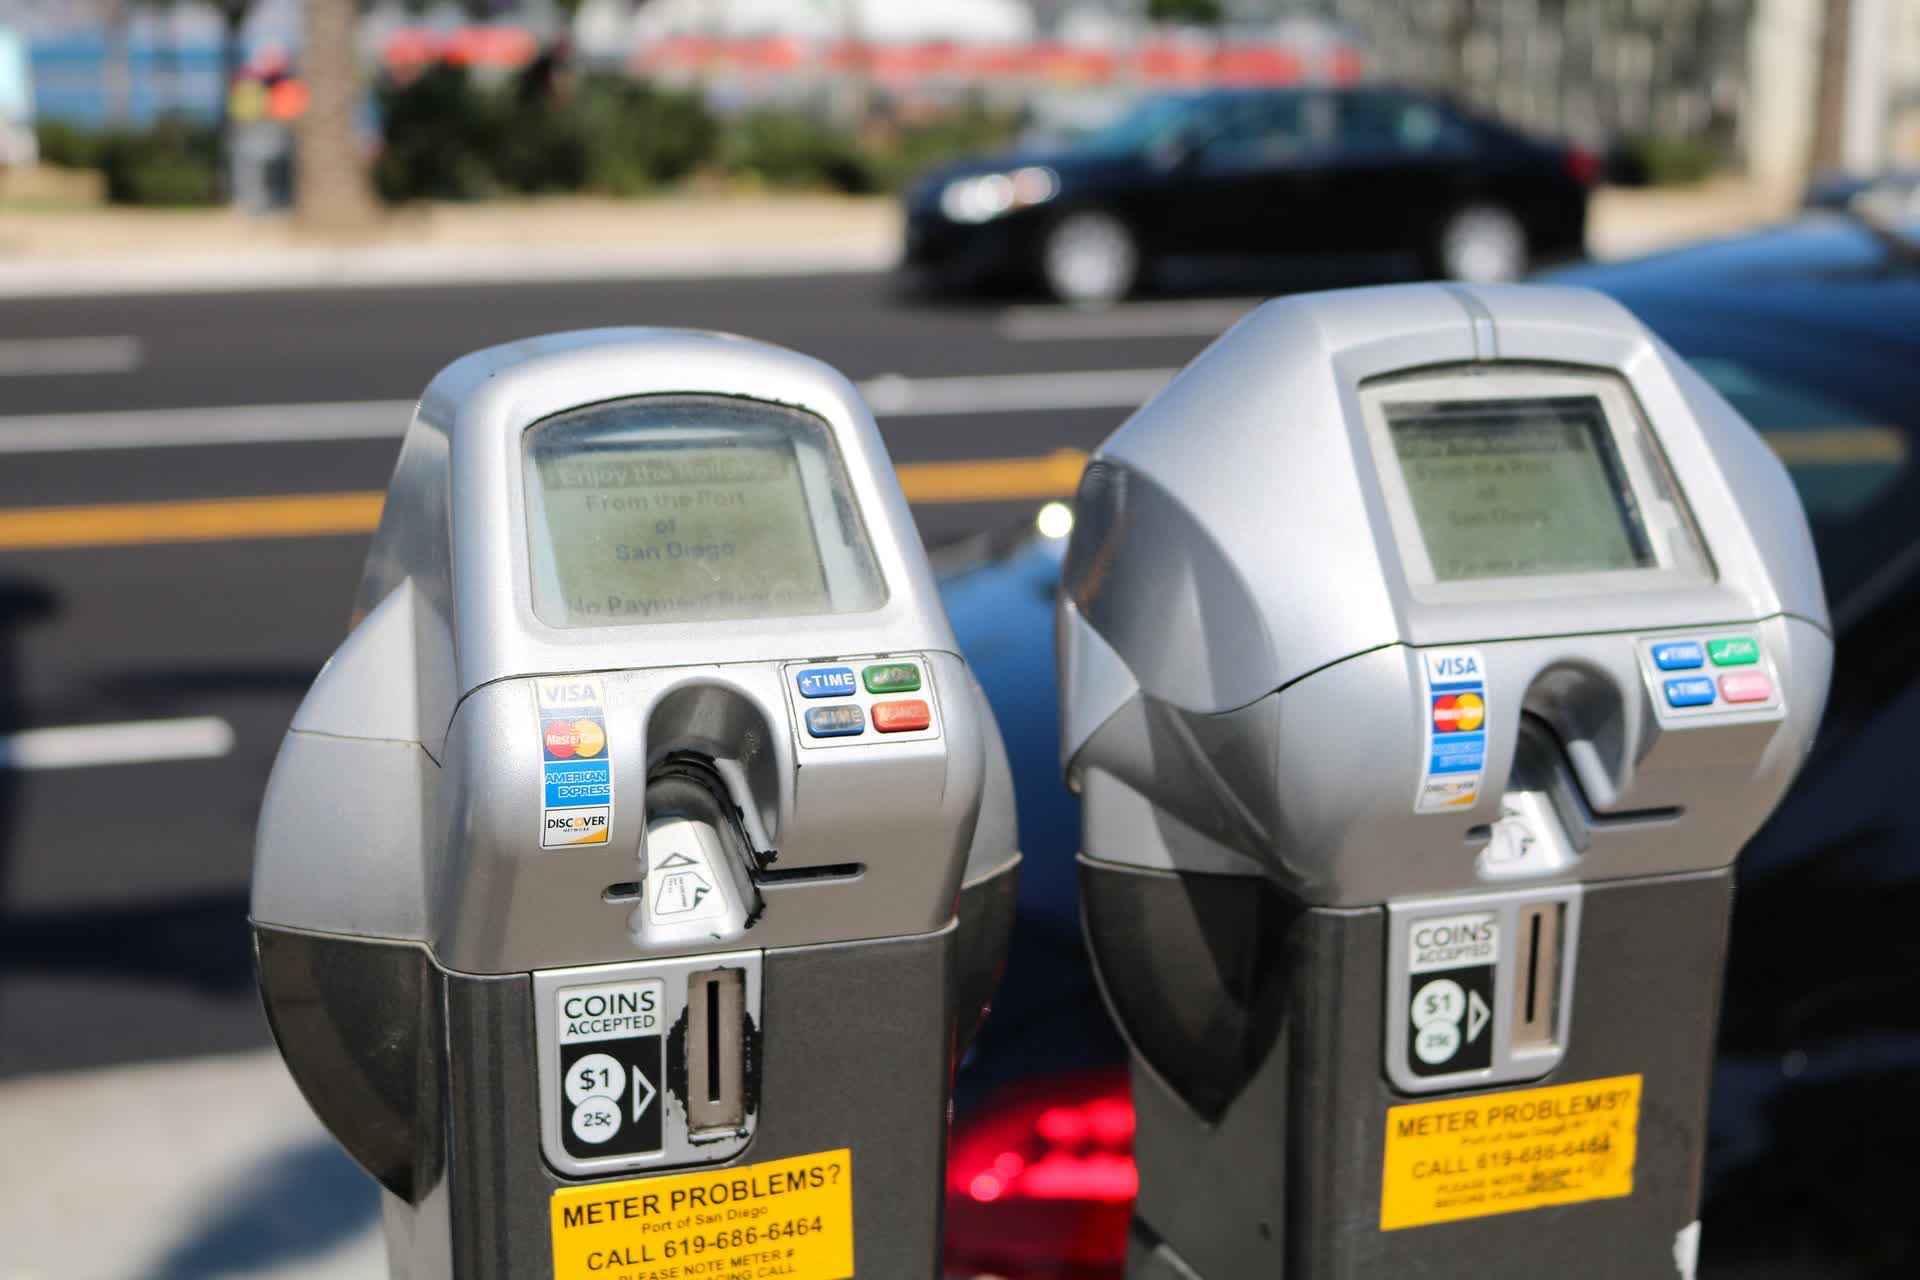 Scammers are placing QR codes on parking meters to steal payment details